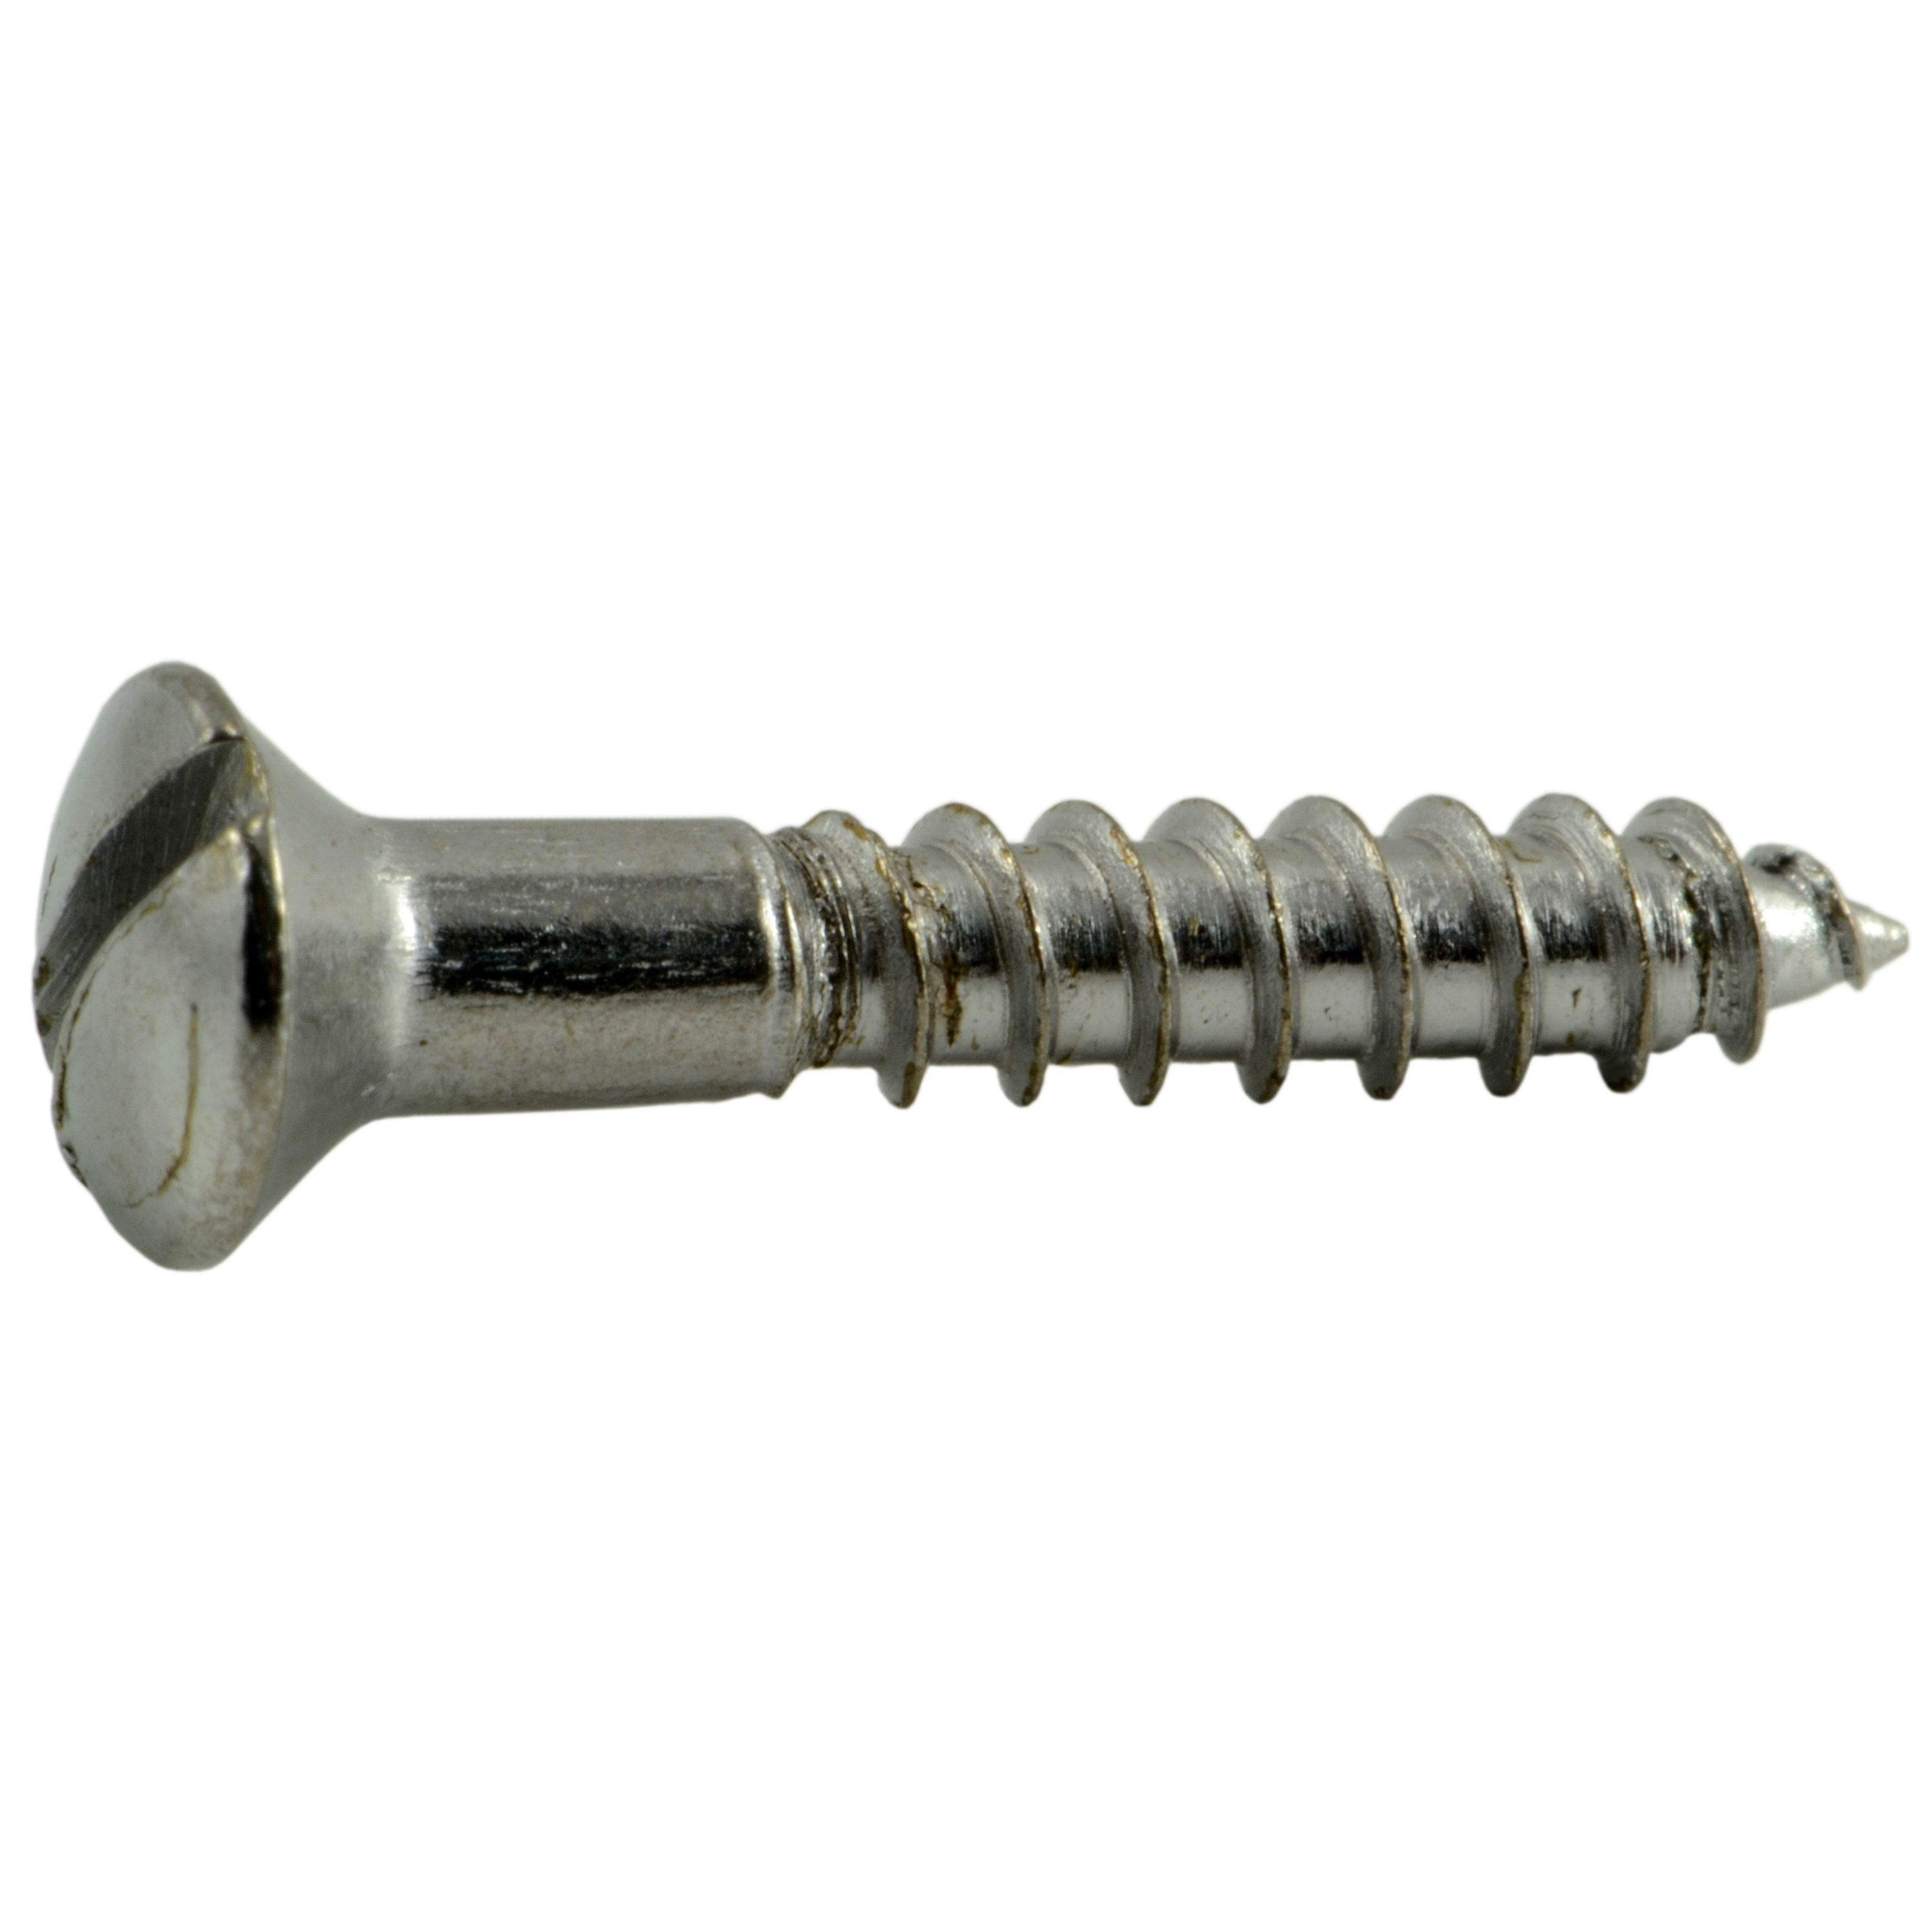 Pack of 12 # 4 X 1/2" Aluminum Oval Head Slotted Wood Screws 